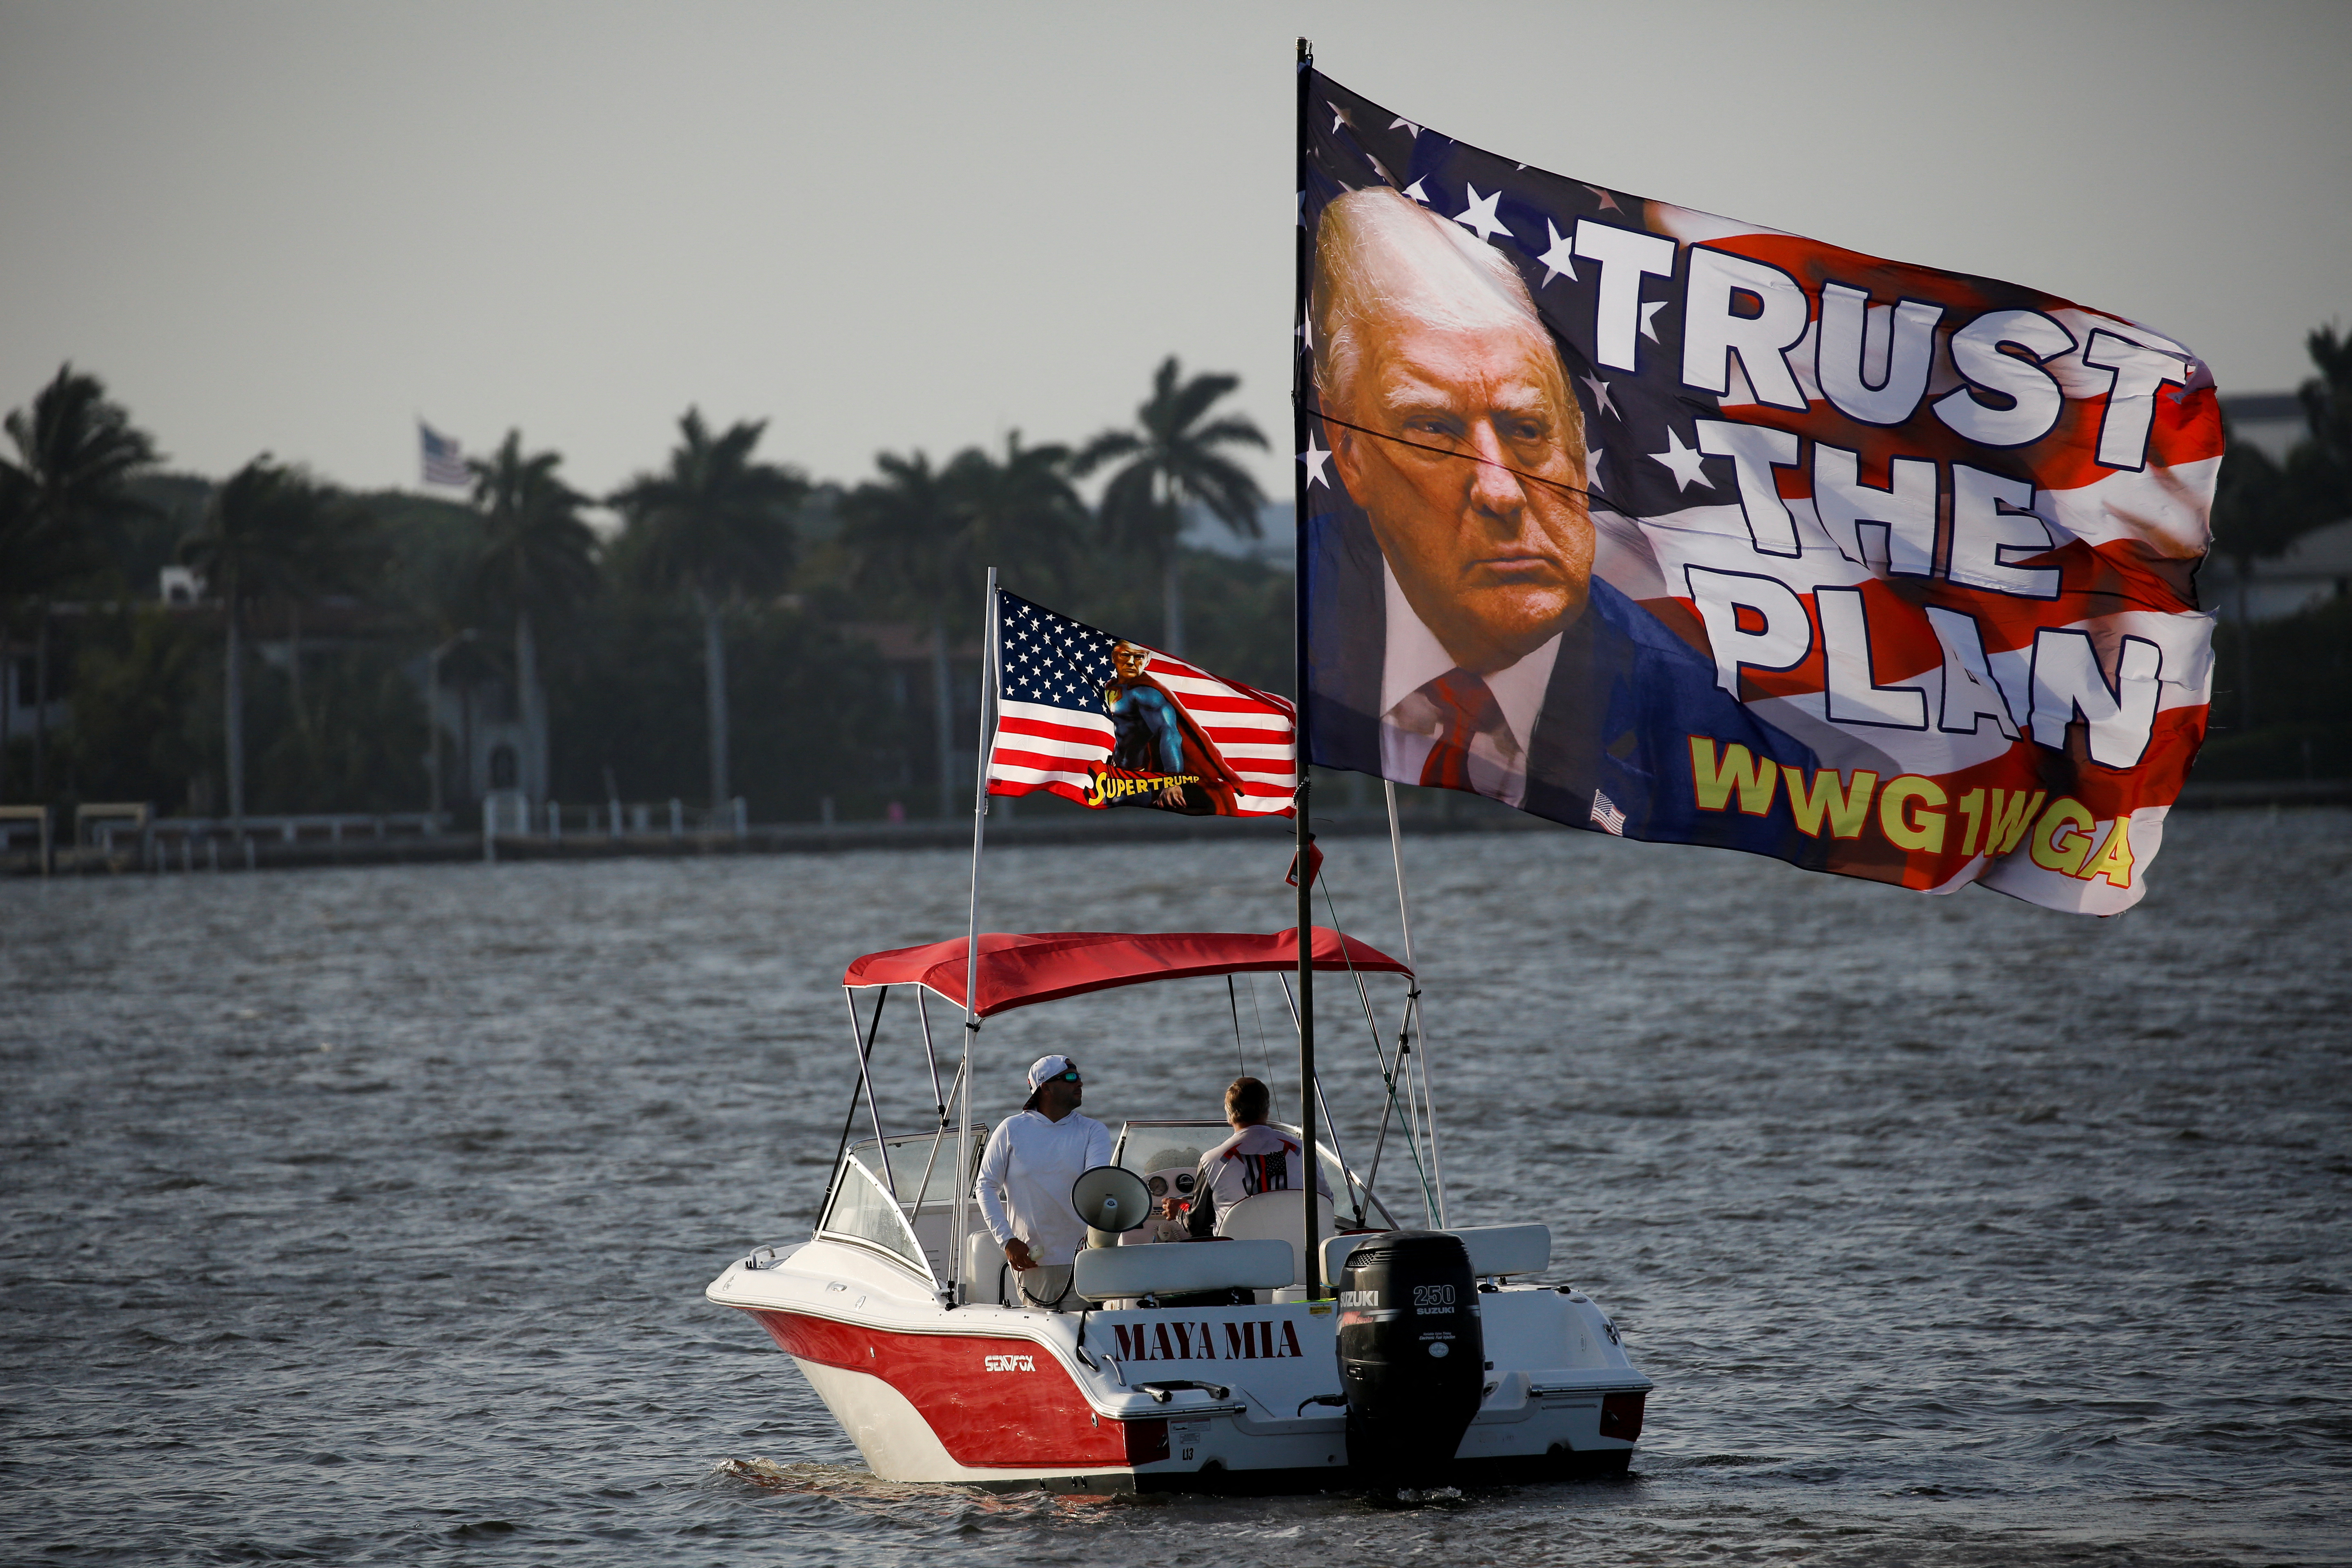 Supporters of former U.S. President Donald Trump gather outside his Mar-a-Lago resort in Palm Beach